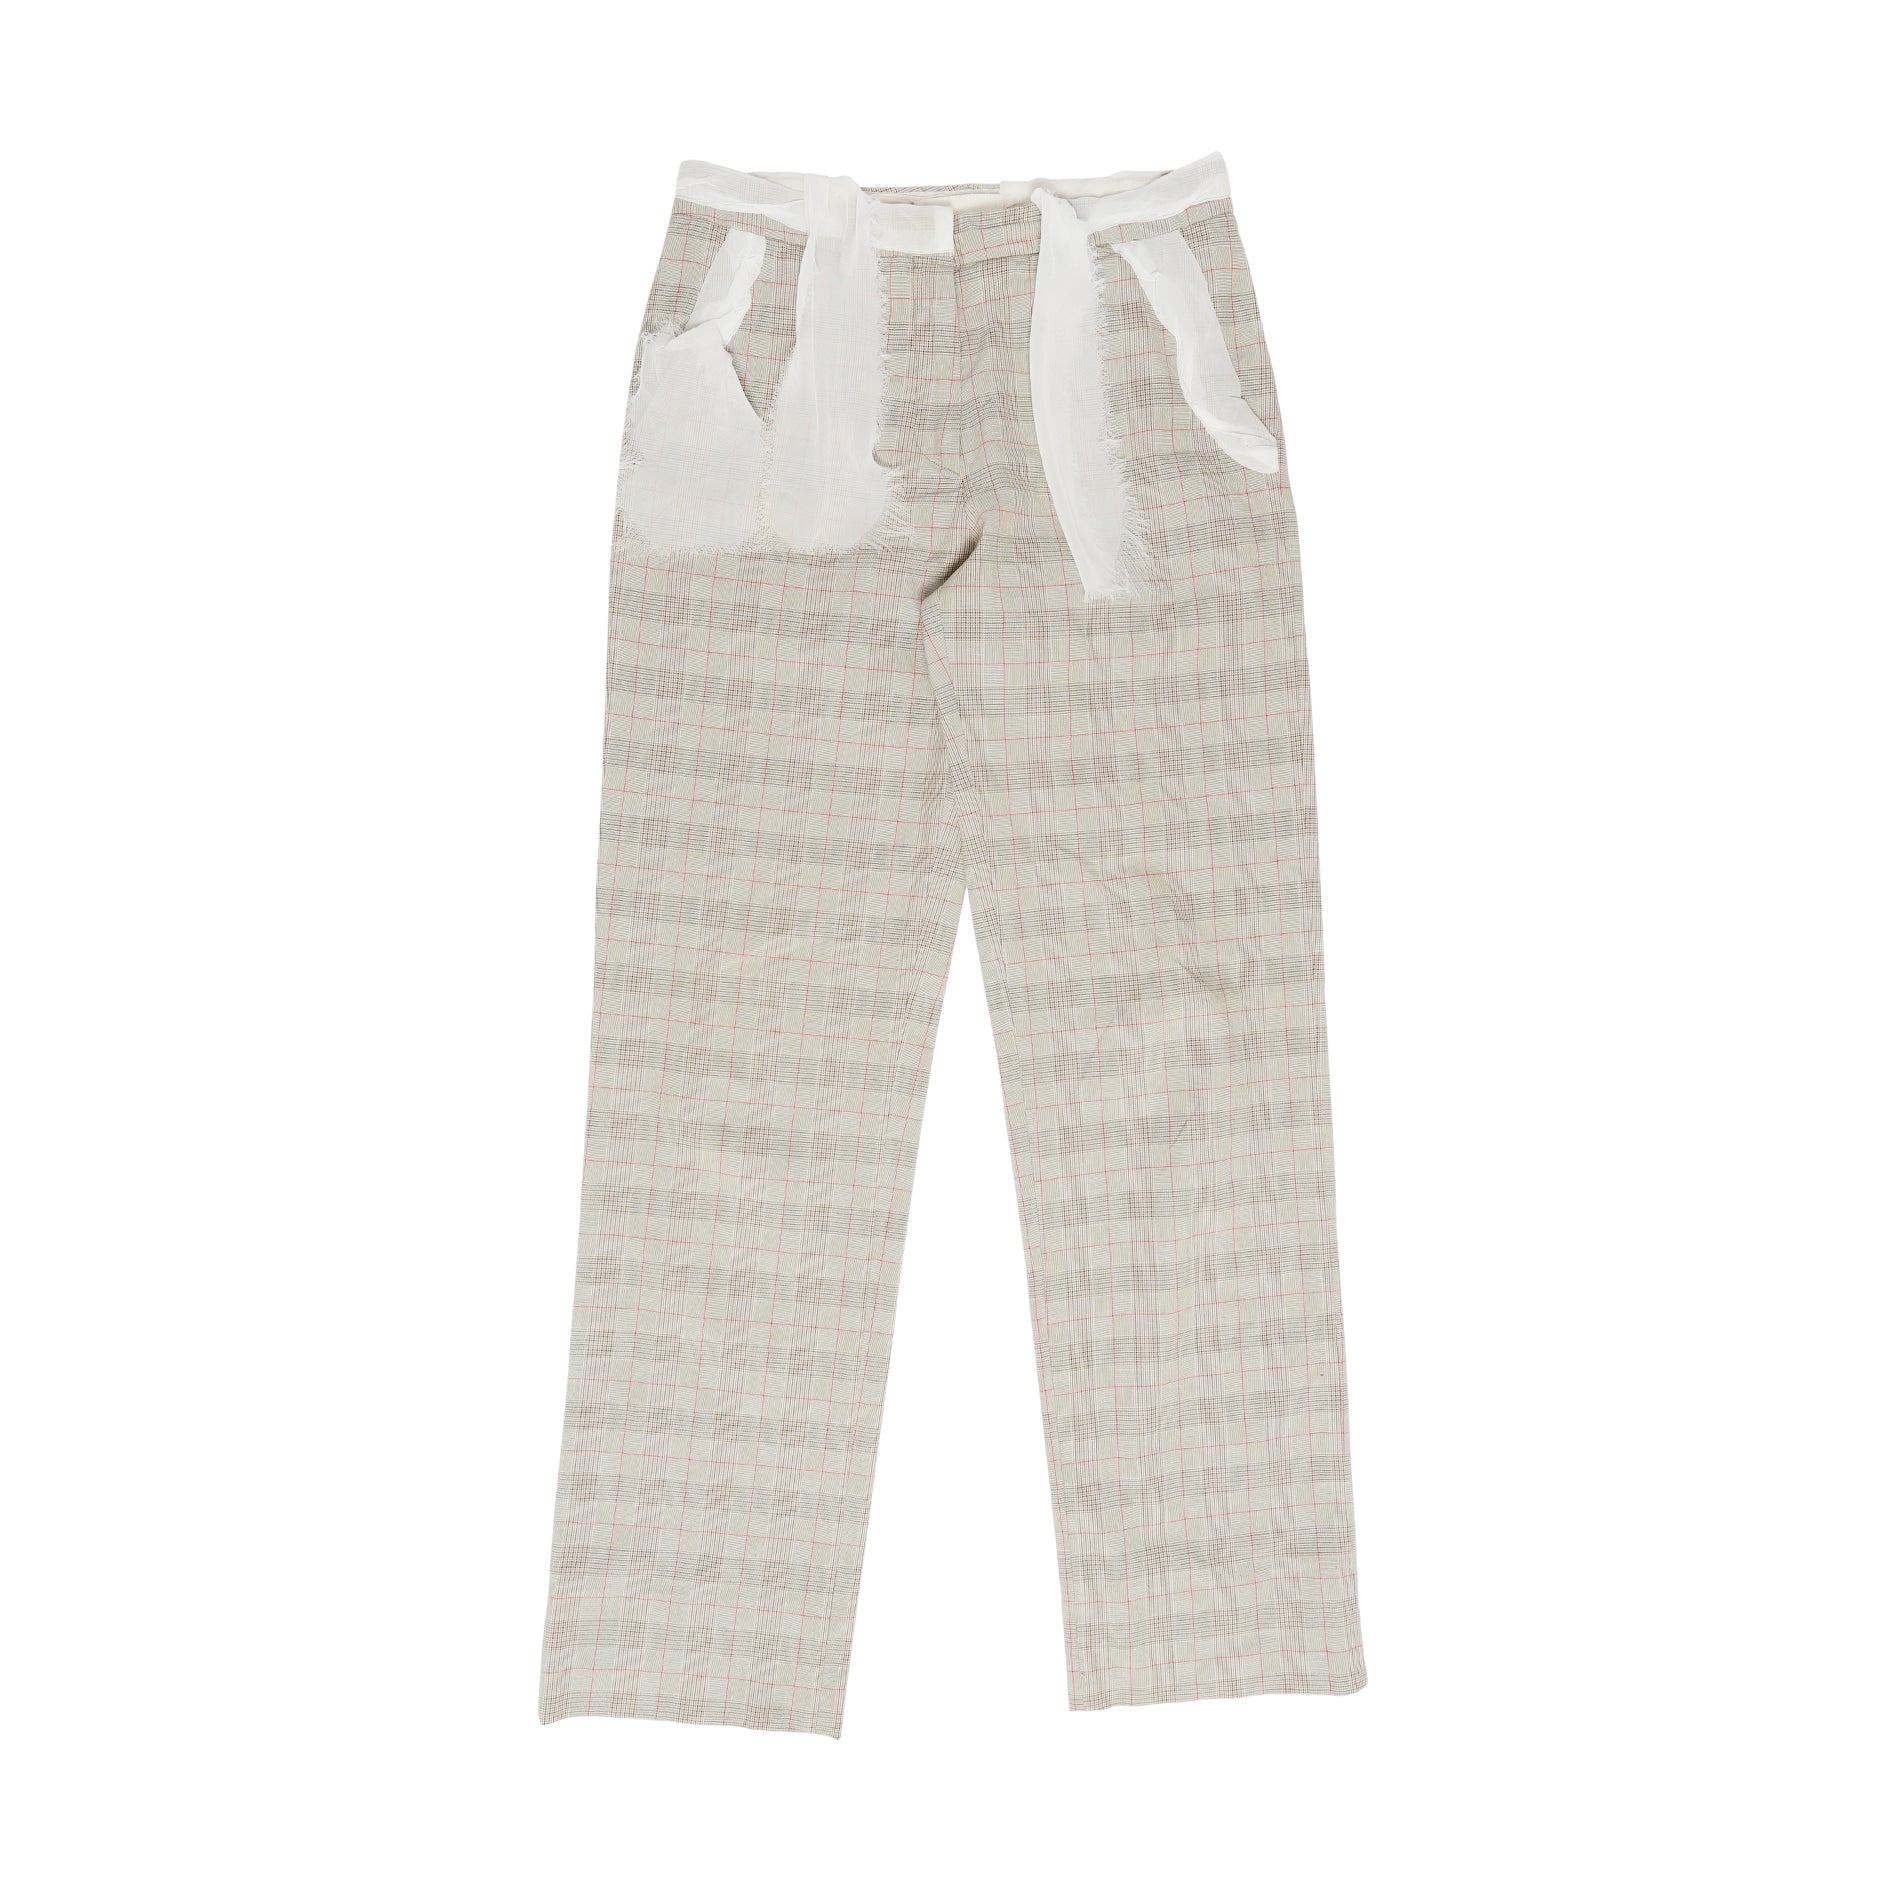 Maison Martin Margiela SS06 Tull Belted Reconstructed Plaid Pants